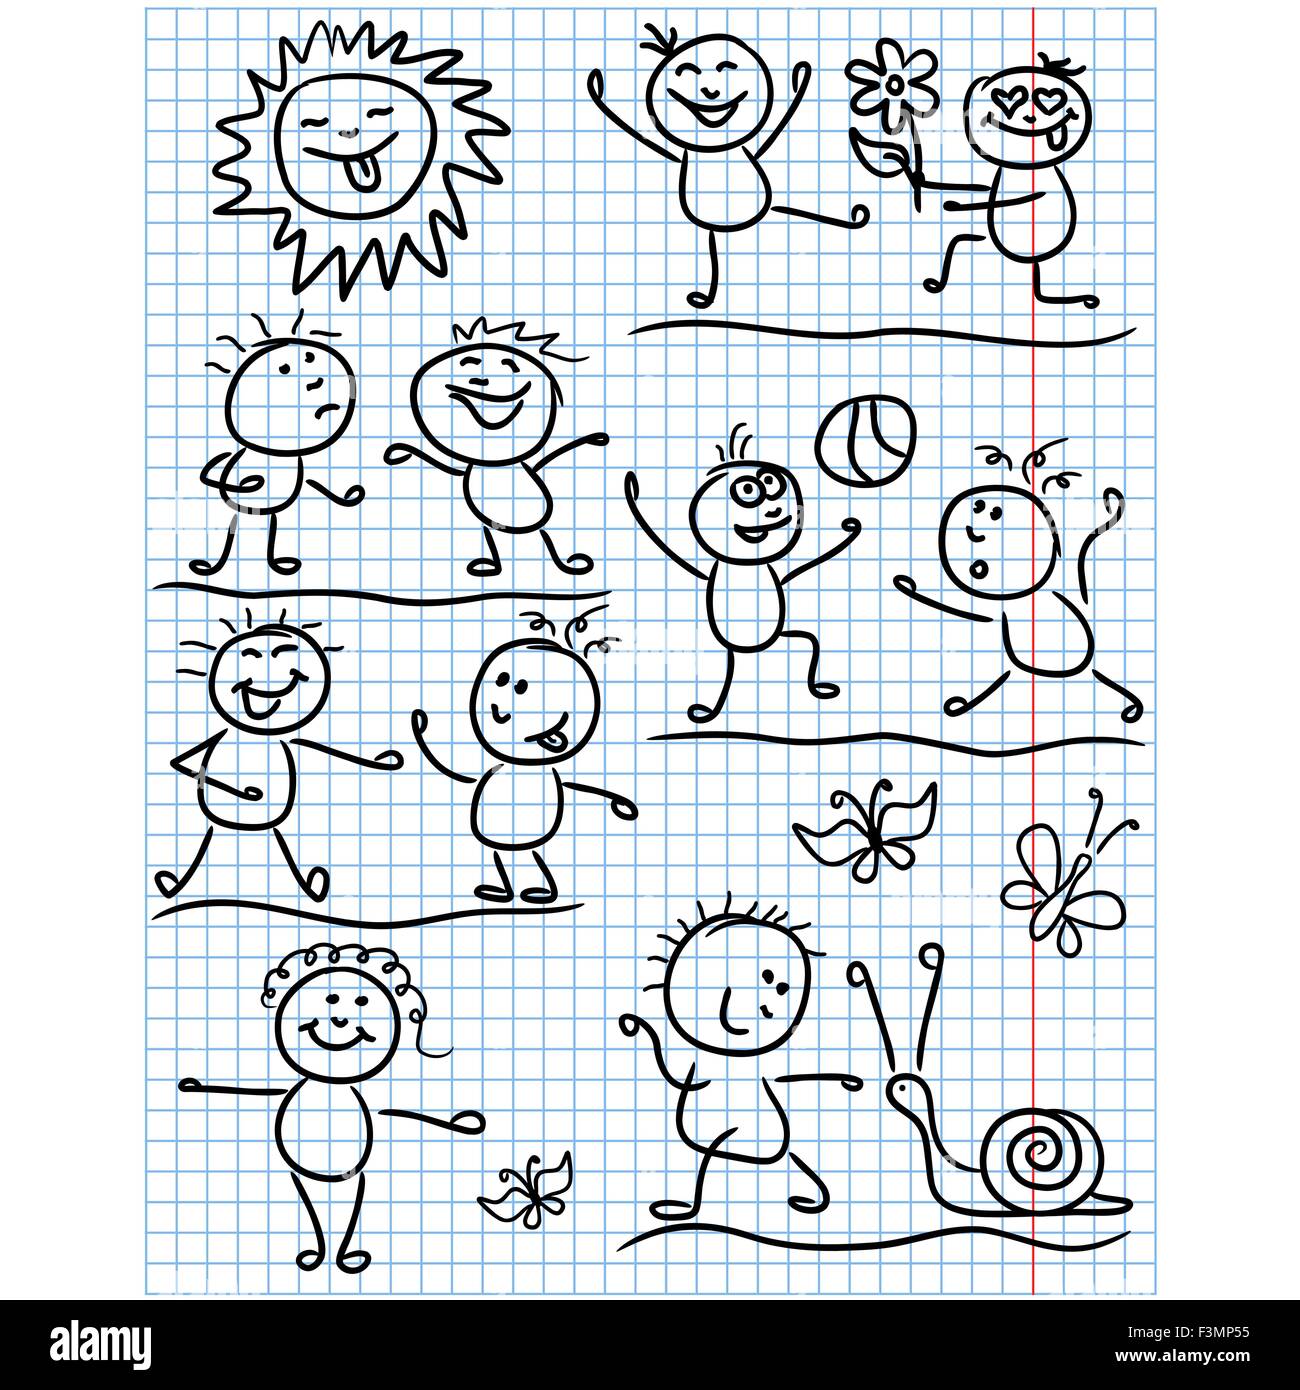 Amusing smiling sun and set of several kid figures in various funny scenes, sketching cartoon vector artwork as a childish drawi Stock Vector